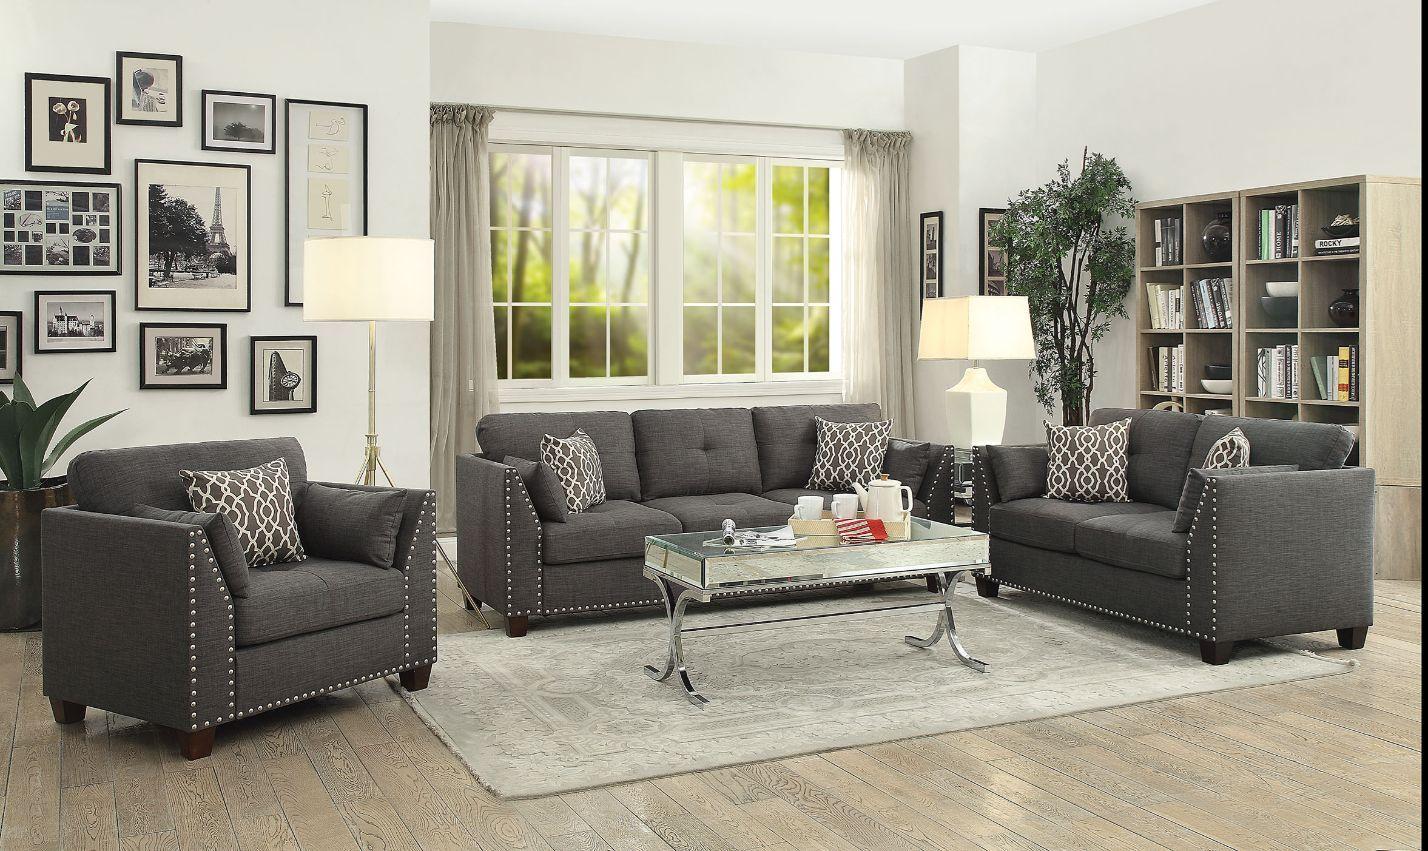 Contemporary, Classic, Simple Sofa and Loveseat Set Laurissa 52405-2pcs in Charcoal Linen